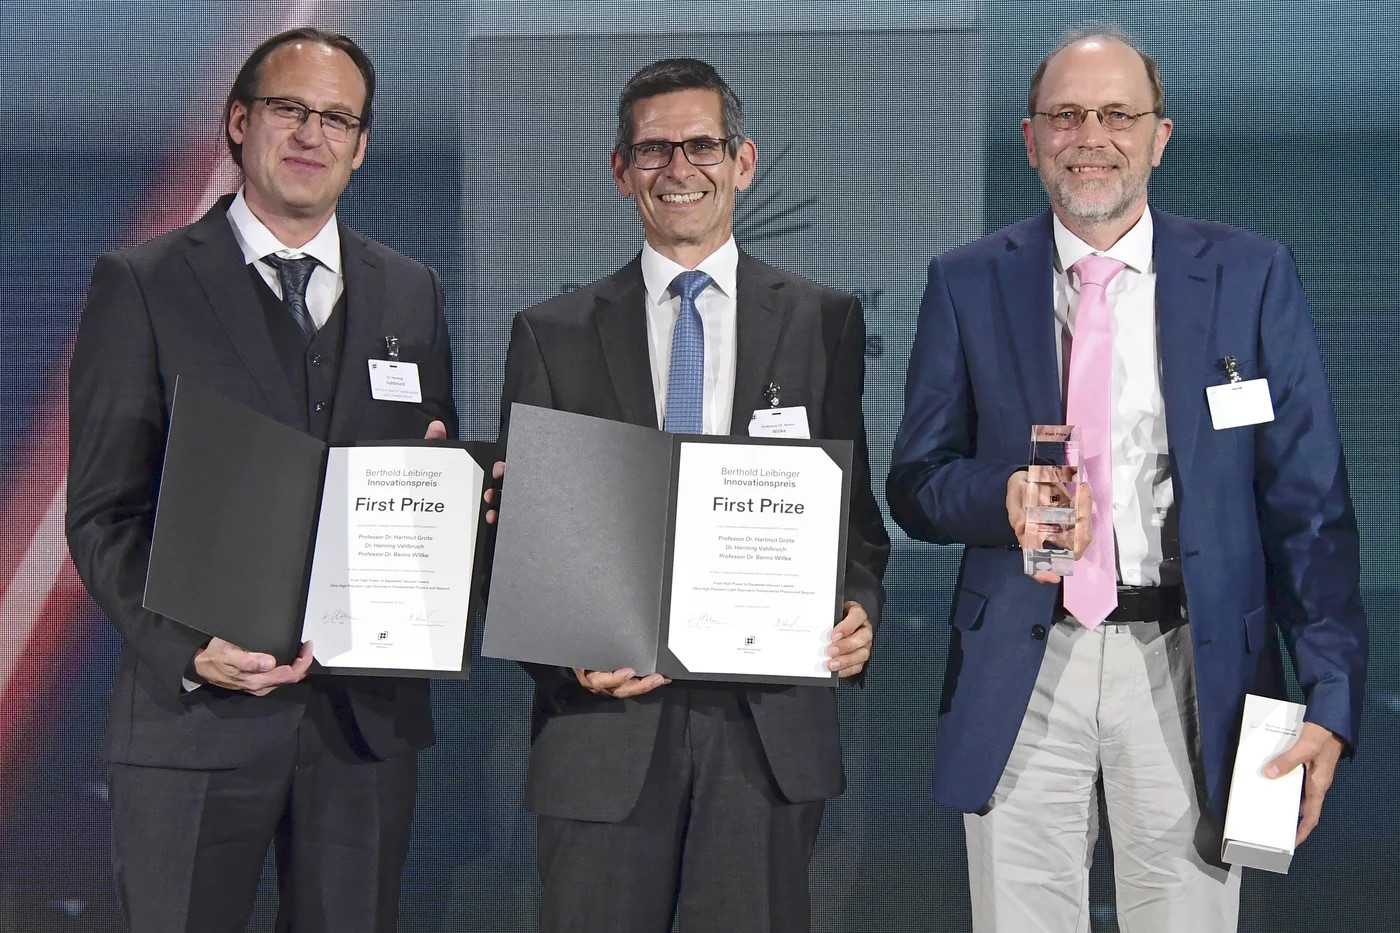 News-Image 0 of: Berthold Leibinger Stiftung honors laser researchers from Hannover and Cardiff